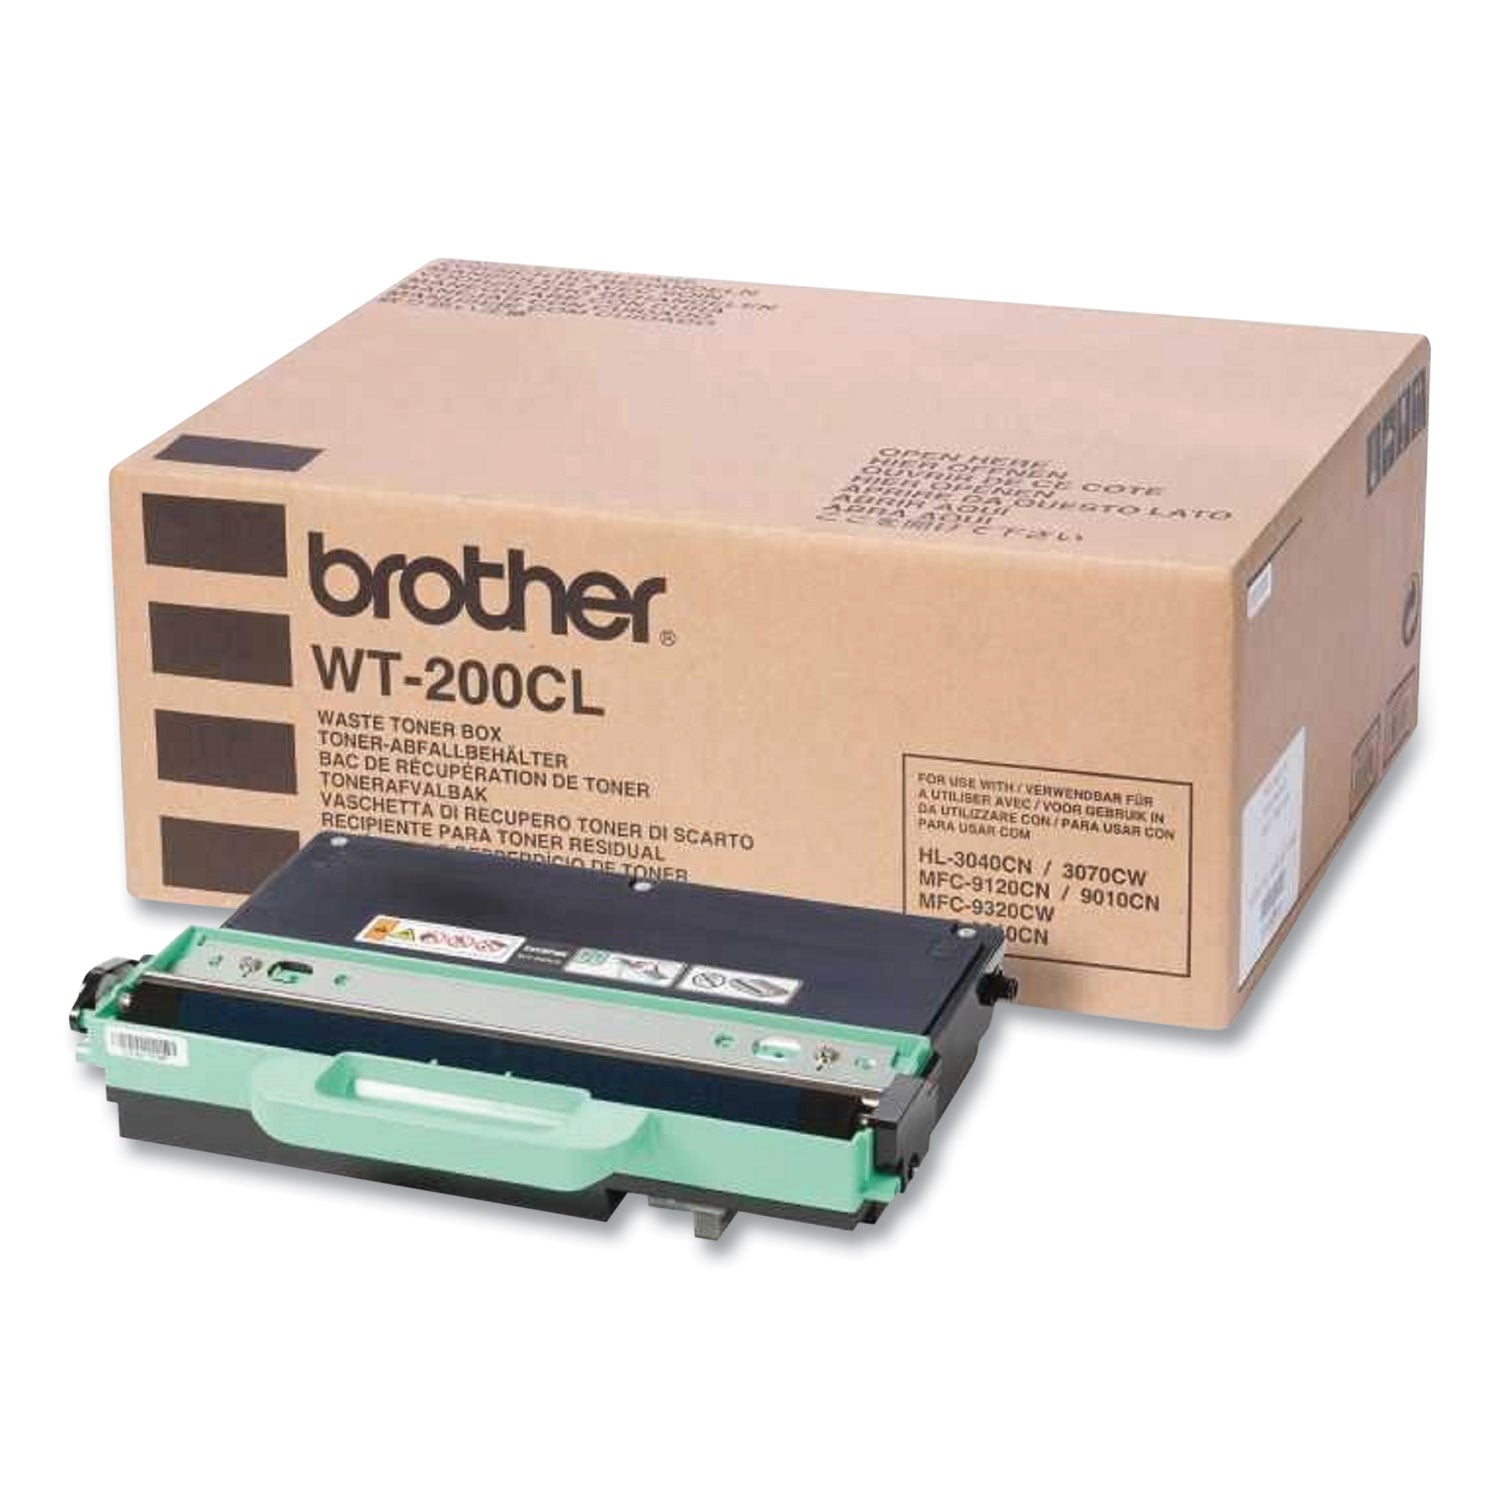 wt200cl-waste-toner-box-50000-page-yield_brtwt200cl - 2